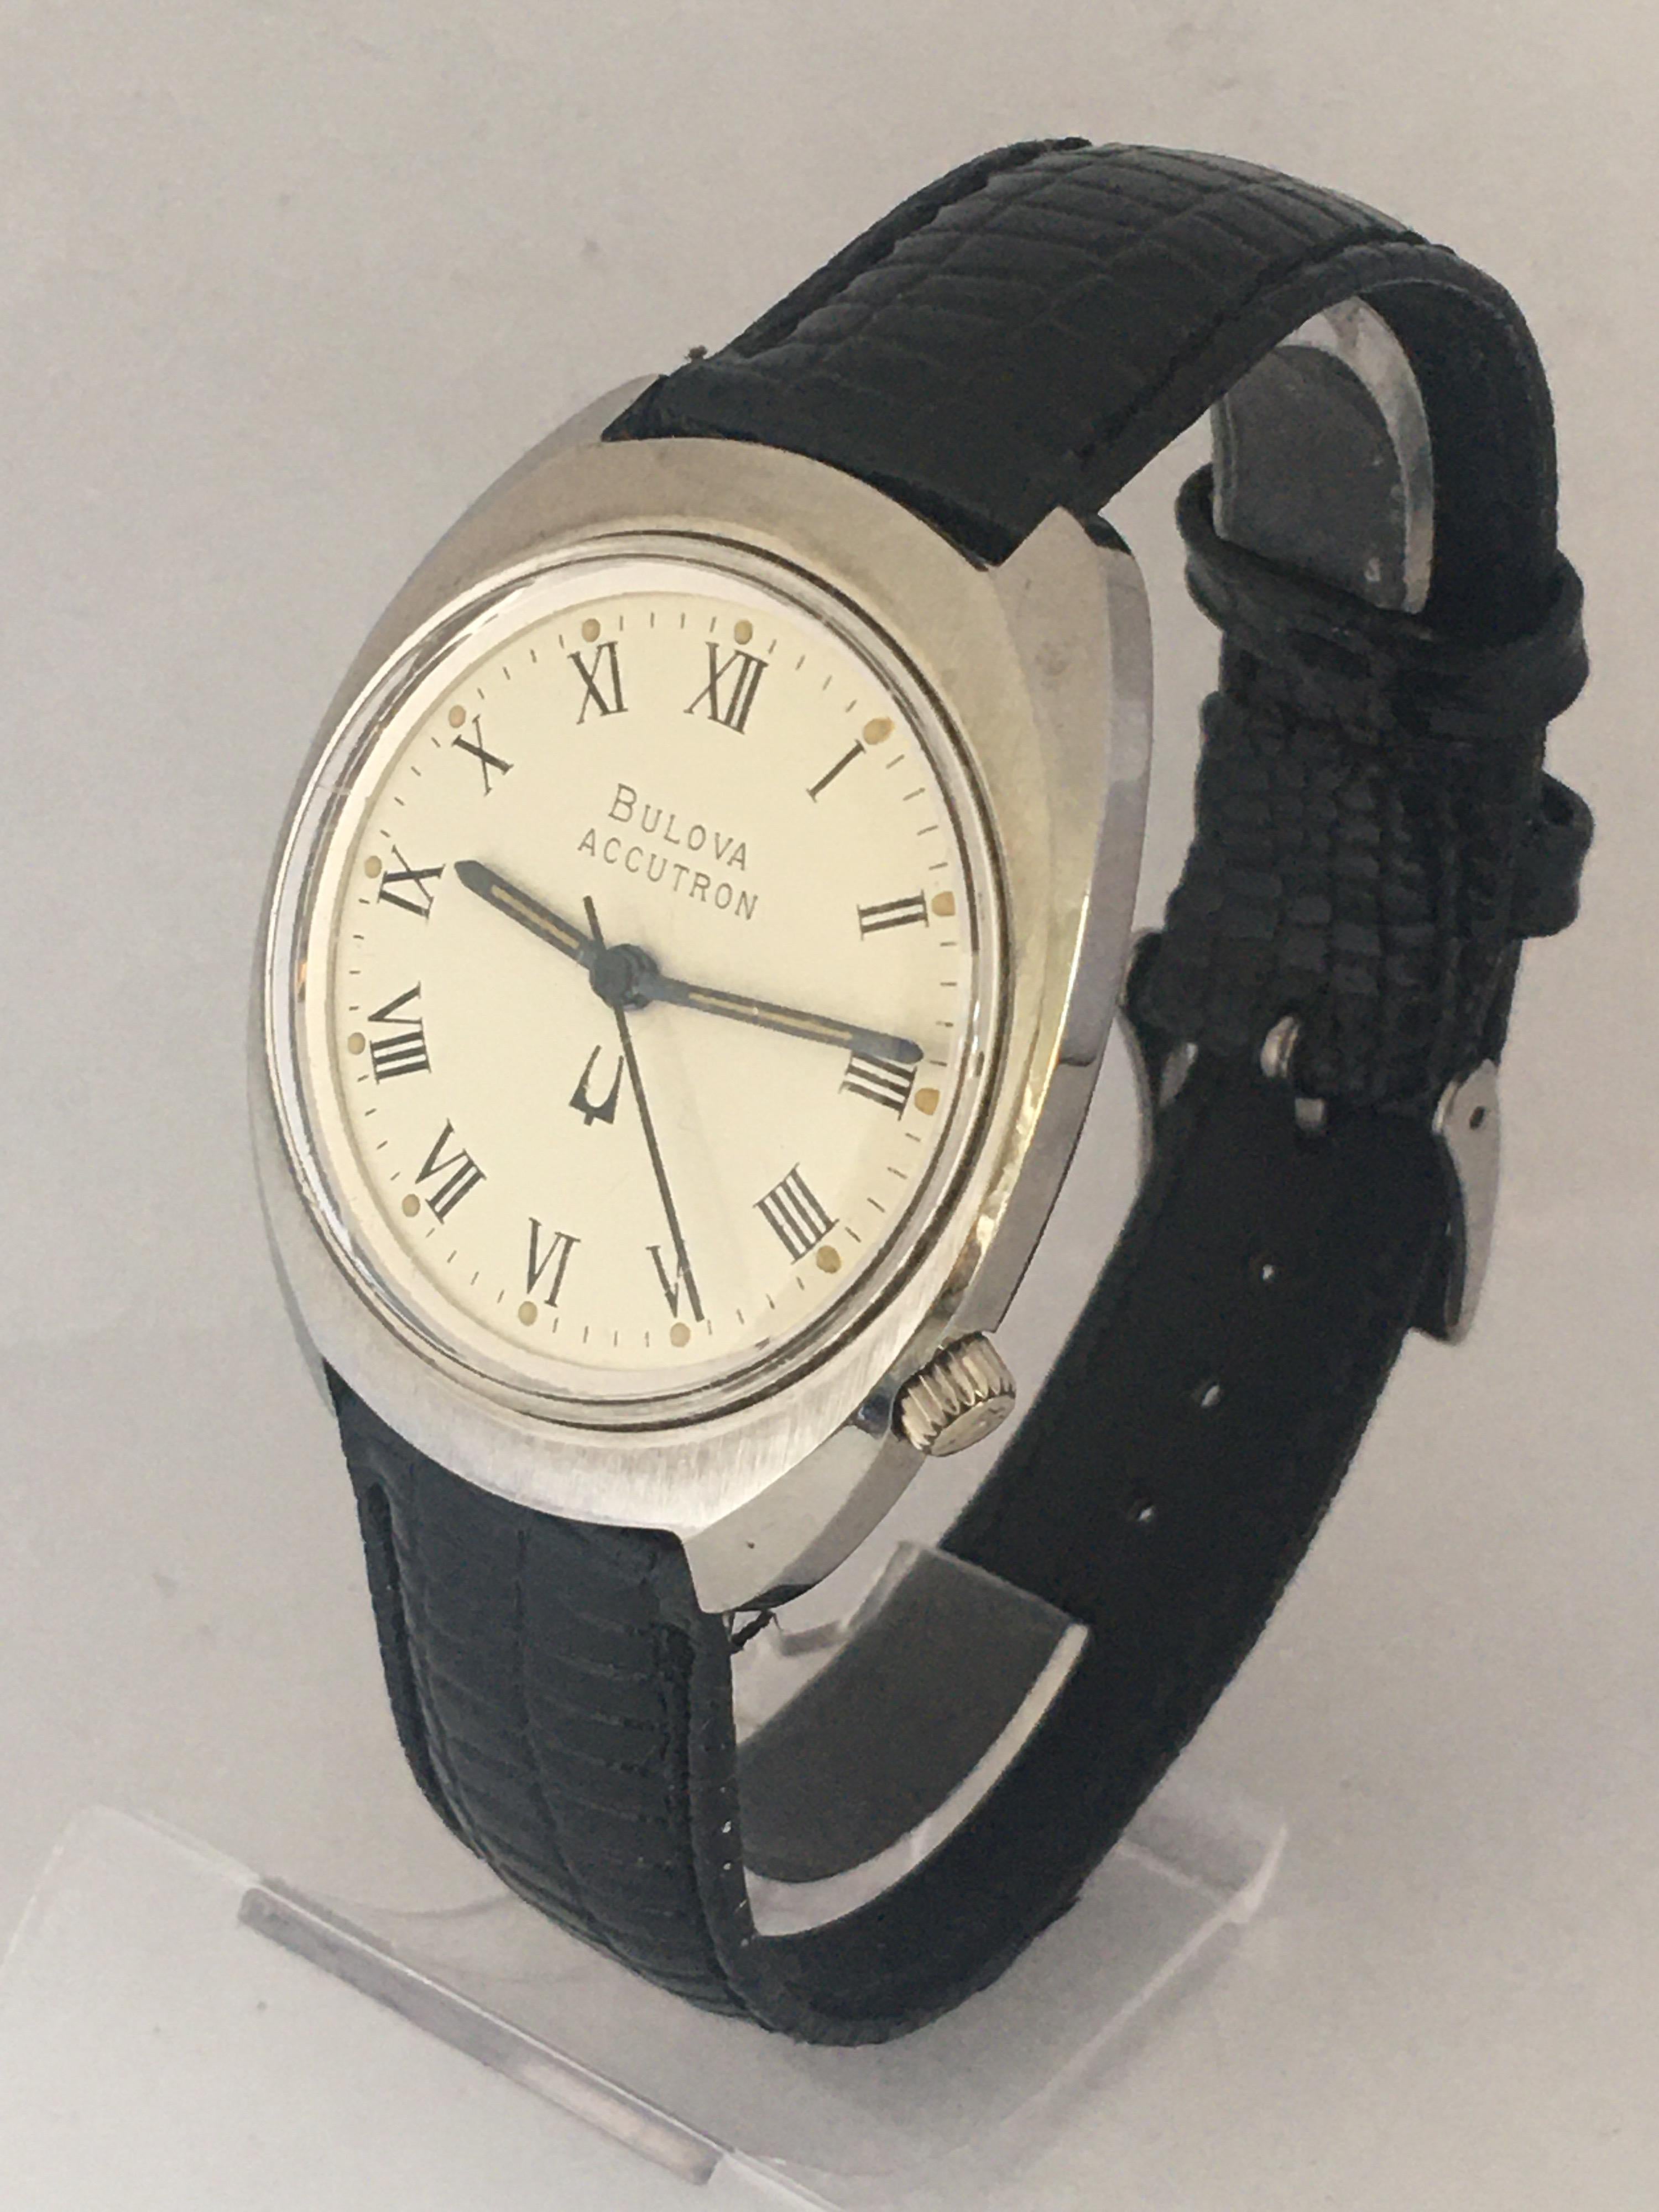 This beautiful pre-owned battery operated vintage watch is in very good working condition and it runs well.  It measured 42mm(lug to lug) long and 35mm wide.Please study the images carefully as form part of the description 
